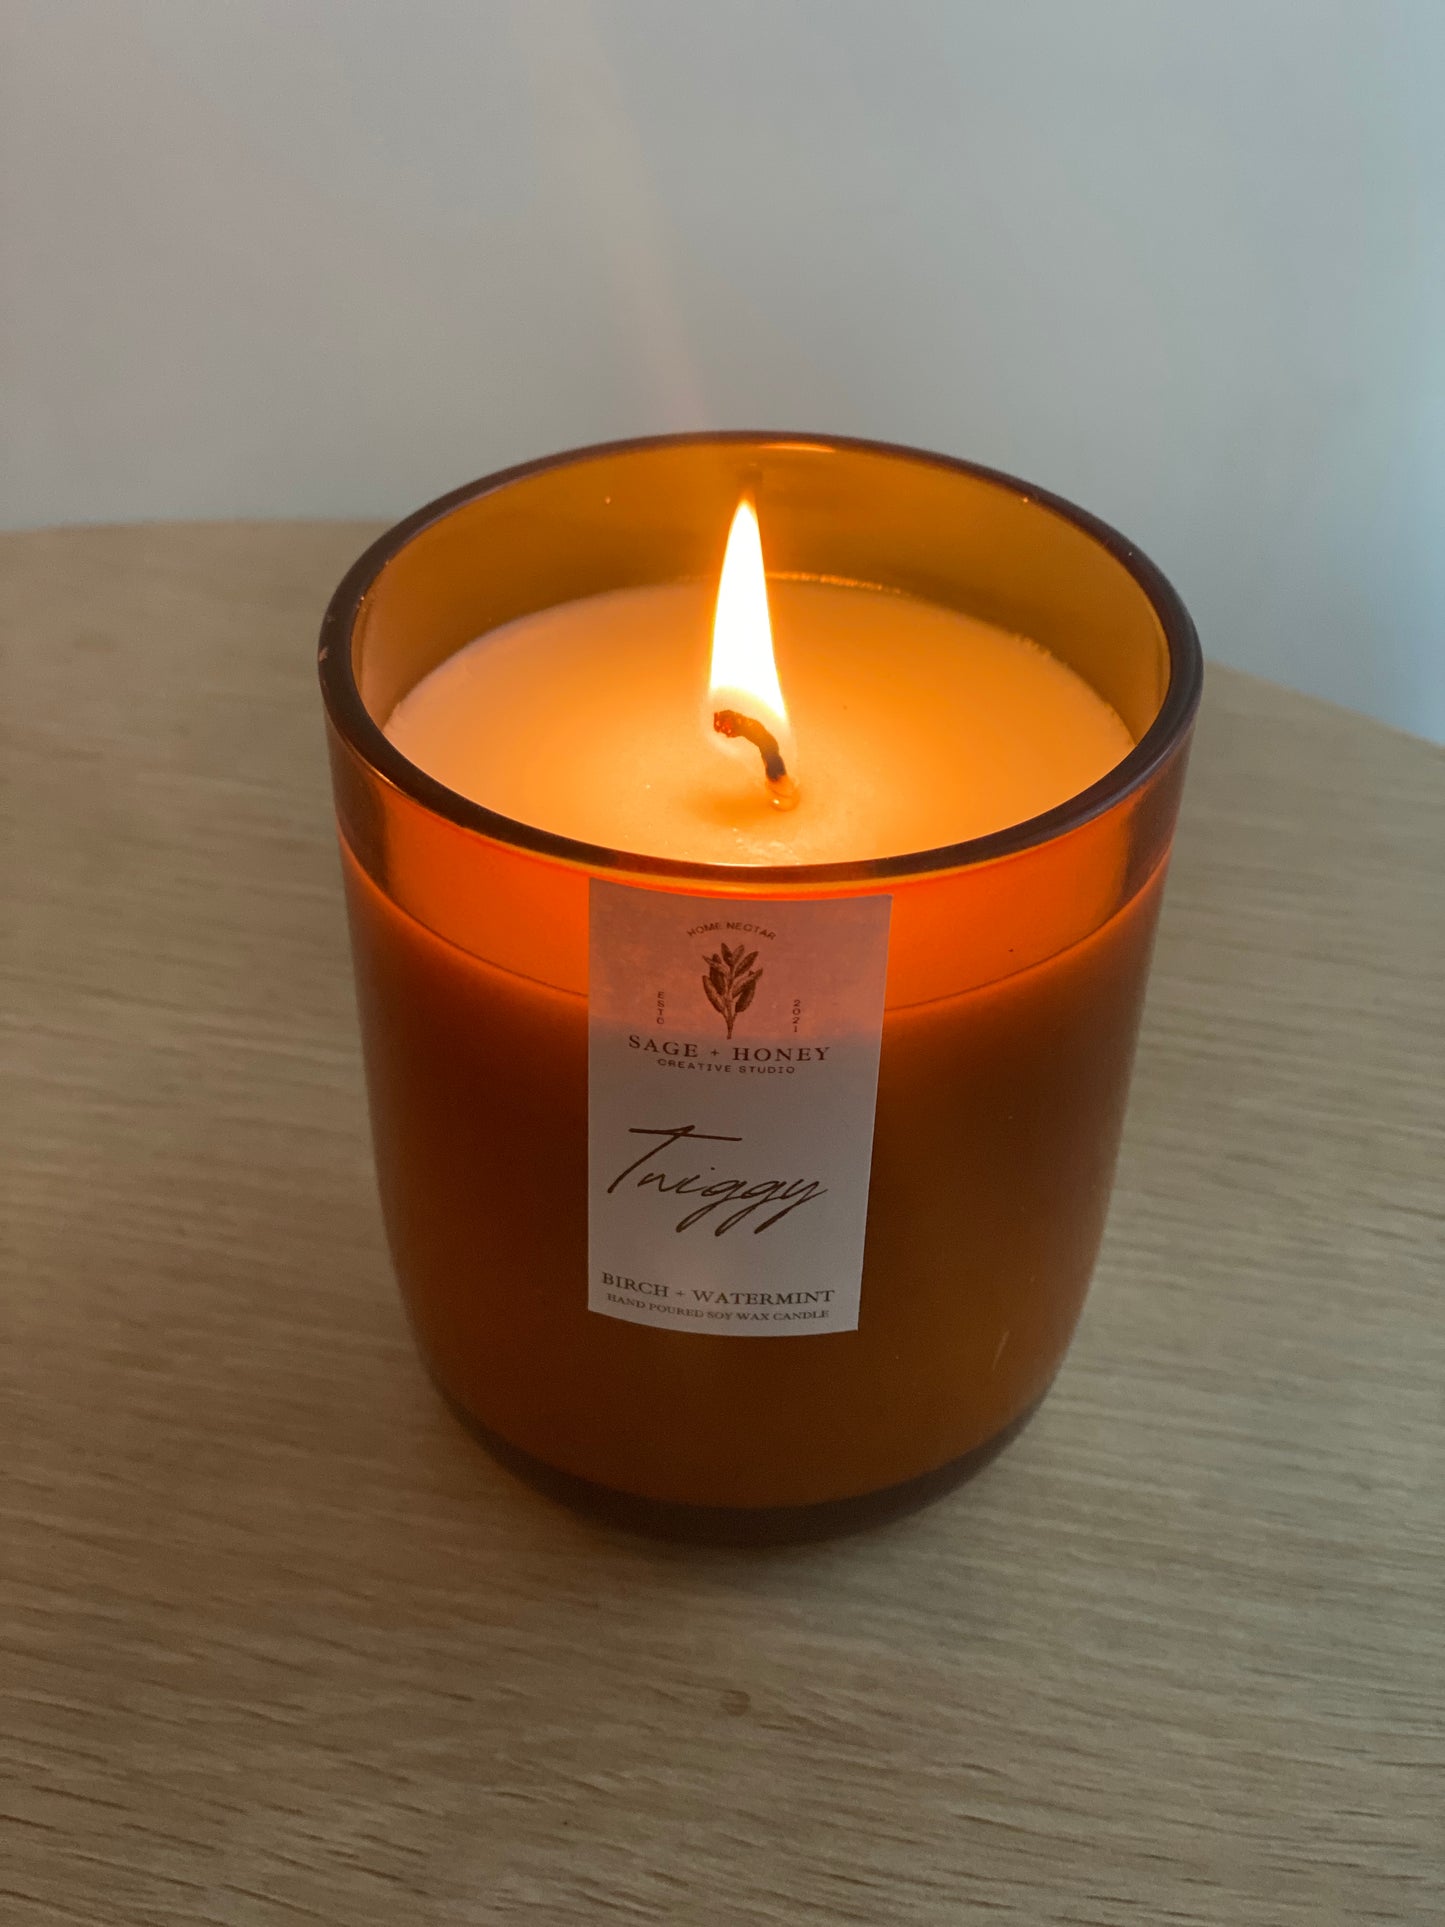 Amber Candle 'Tasting' Trio - Choose your own scents